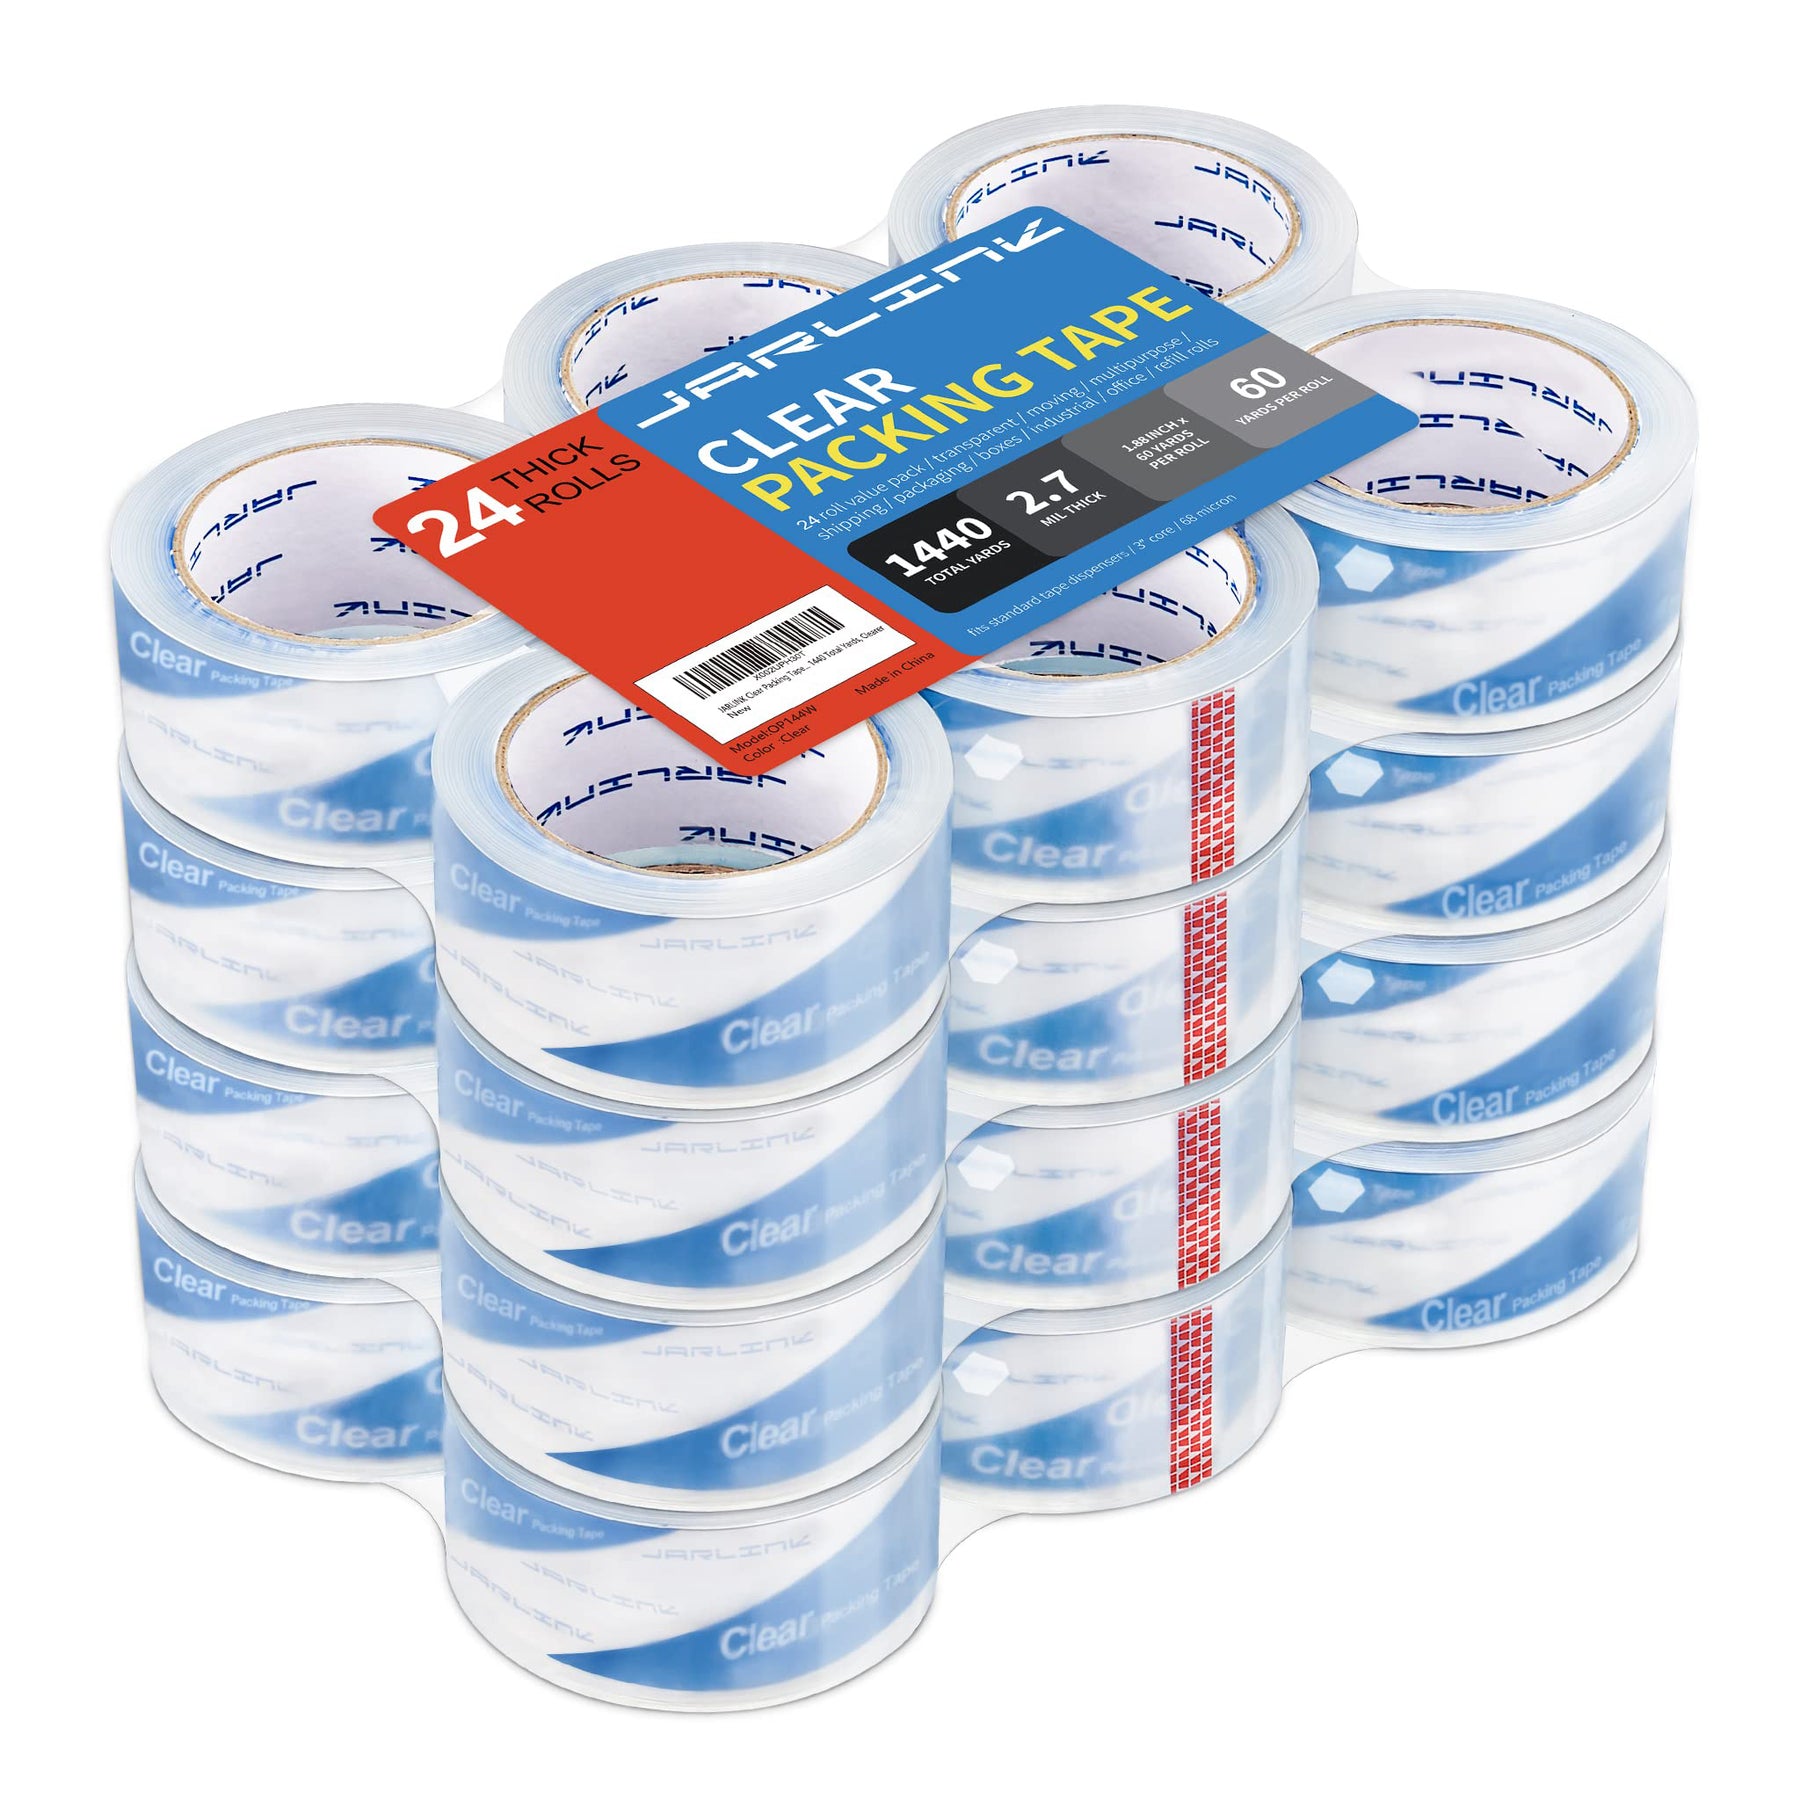 JARLINK Upgraded Version Clearer Packing Tape 12 Rolls, Heavy Duty Pac